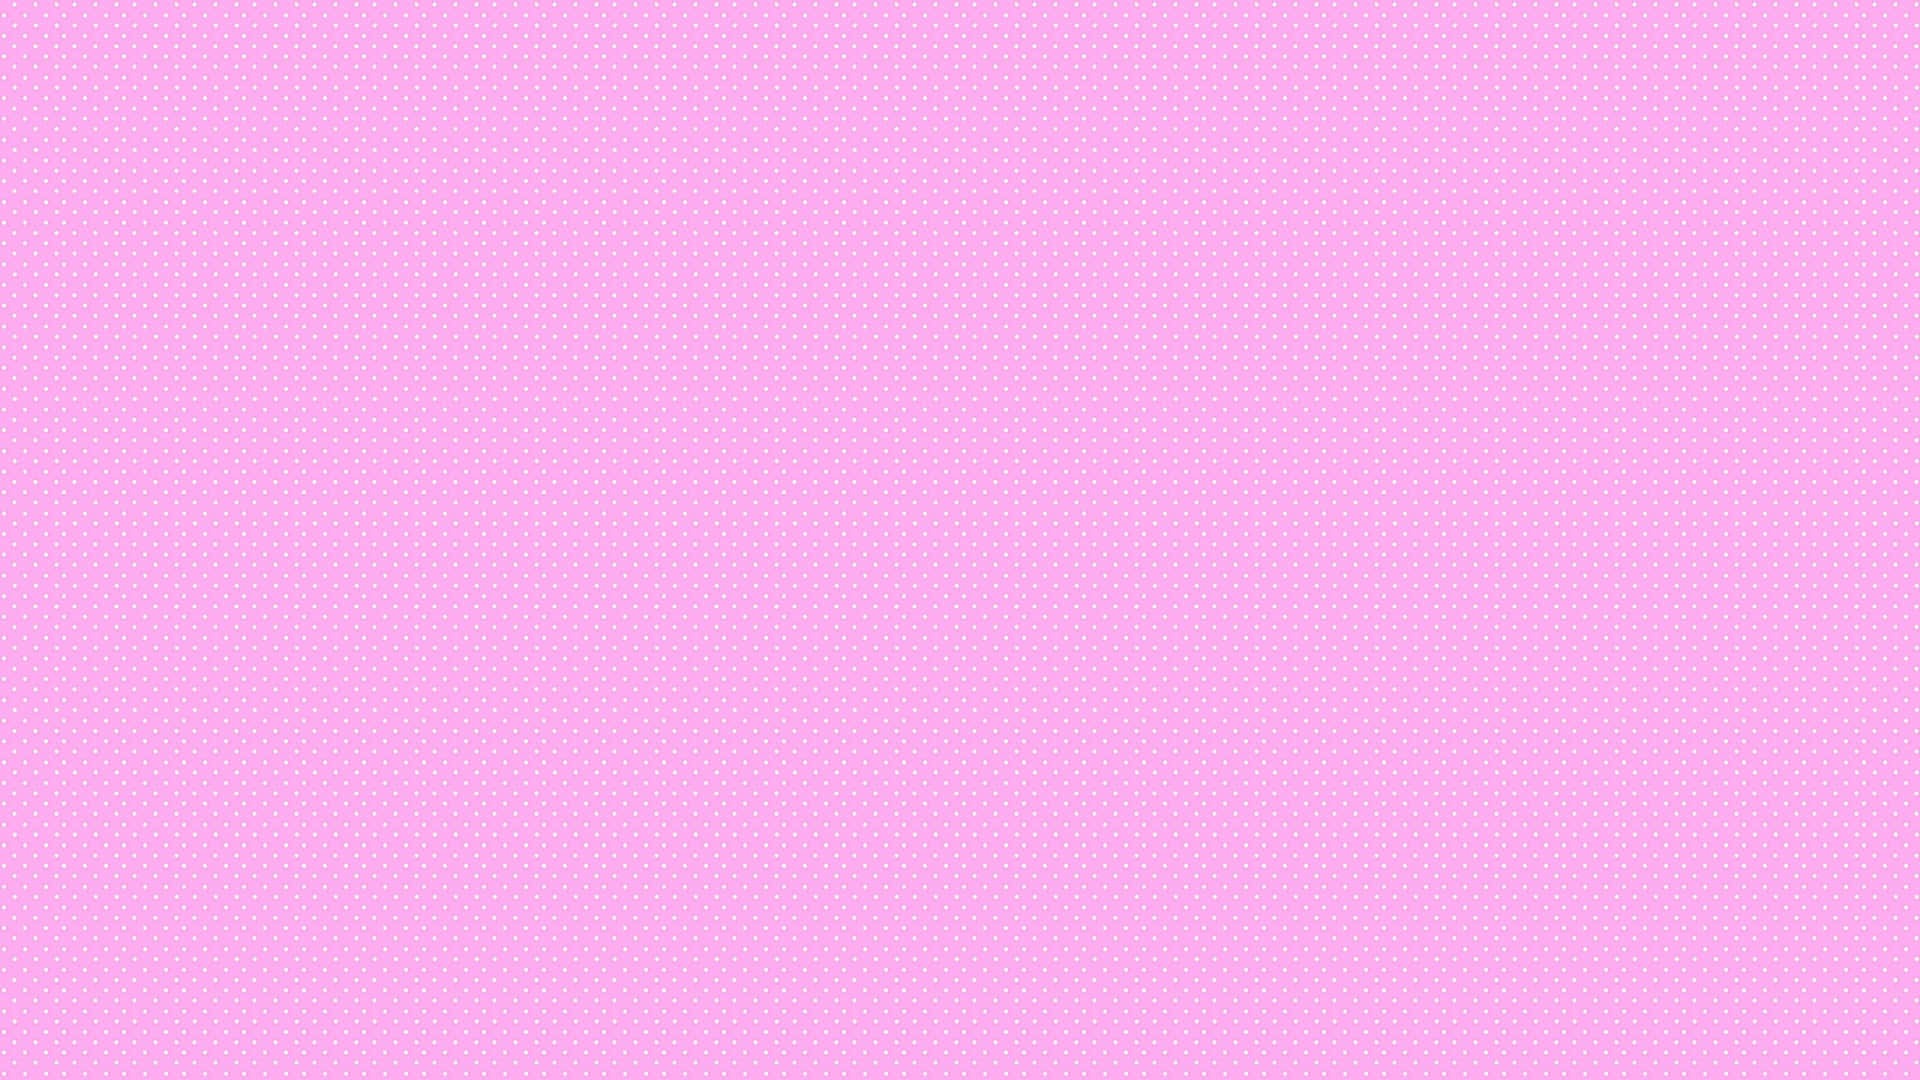 Download A Pink Background With A White Background | Wallpapers.com